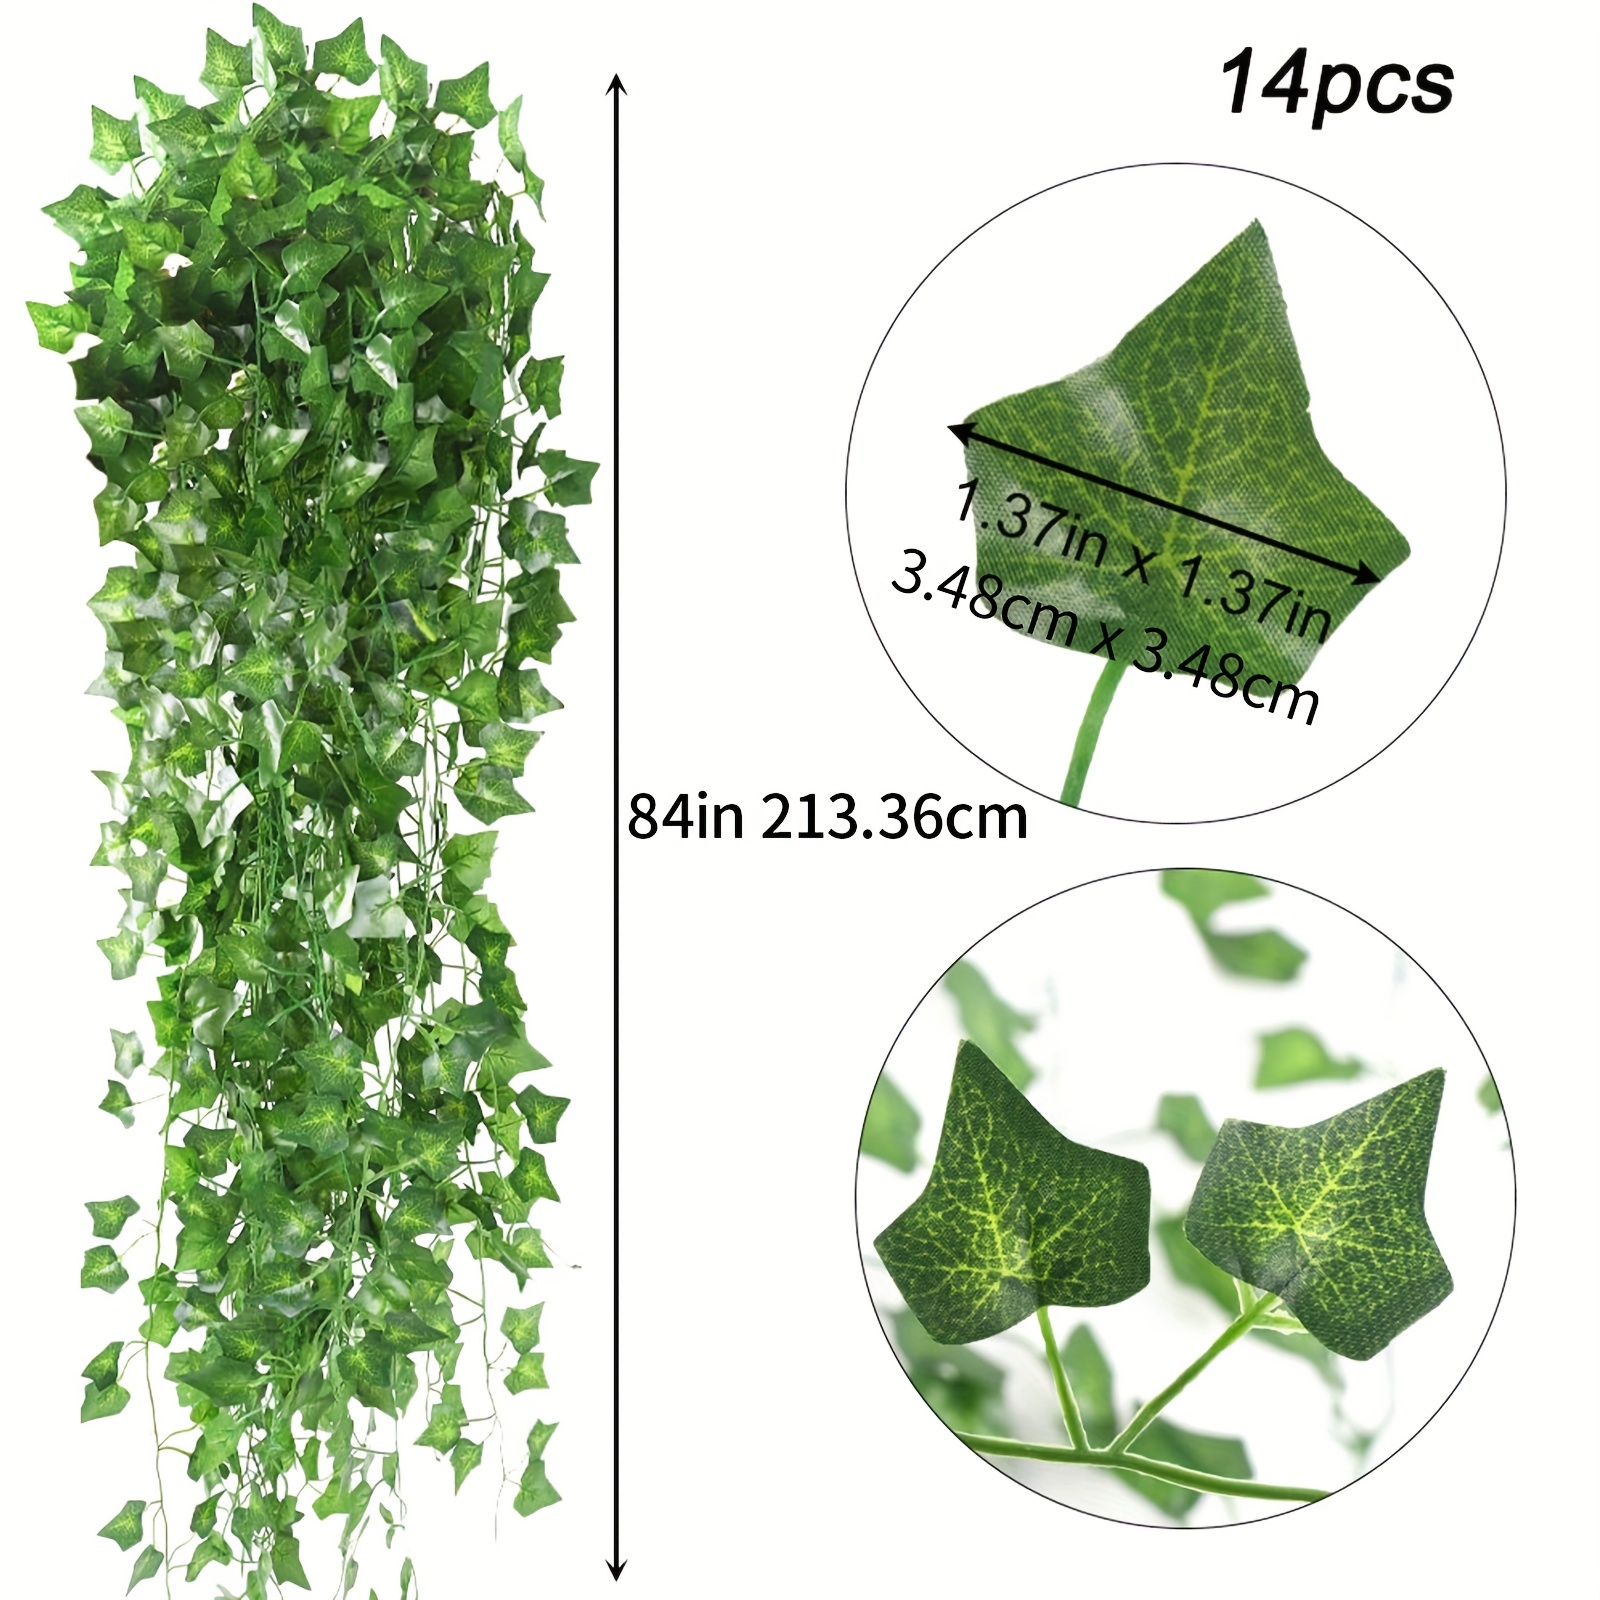 12 Pack 98 Feet Fake Ivy Leaves Artificial Ivy Garland Greenery